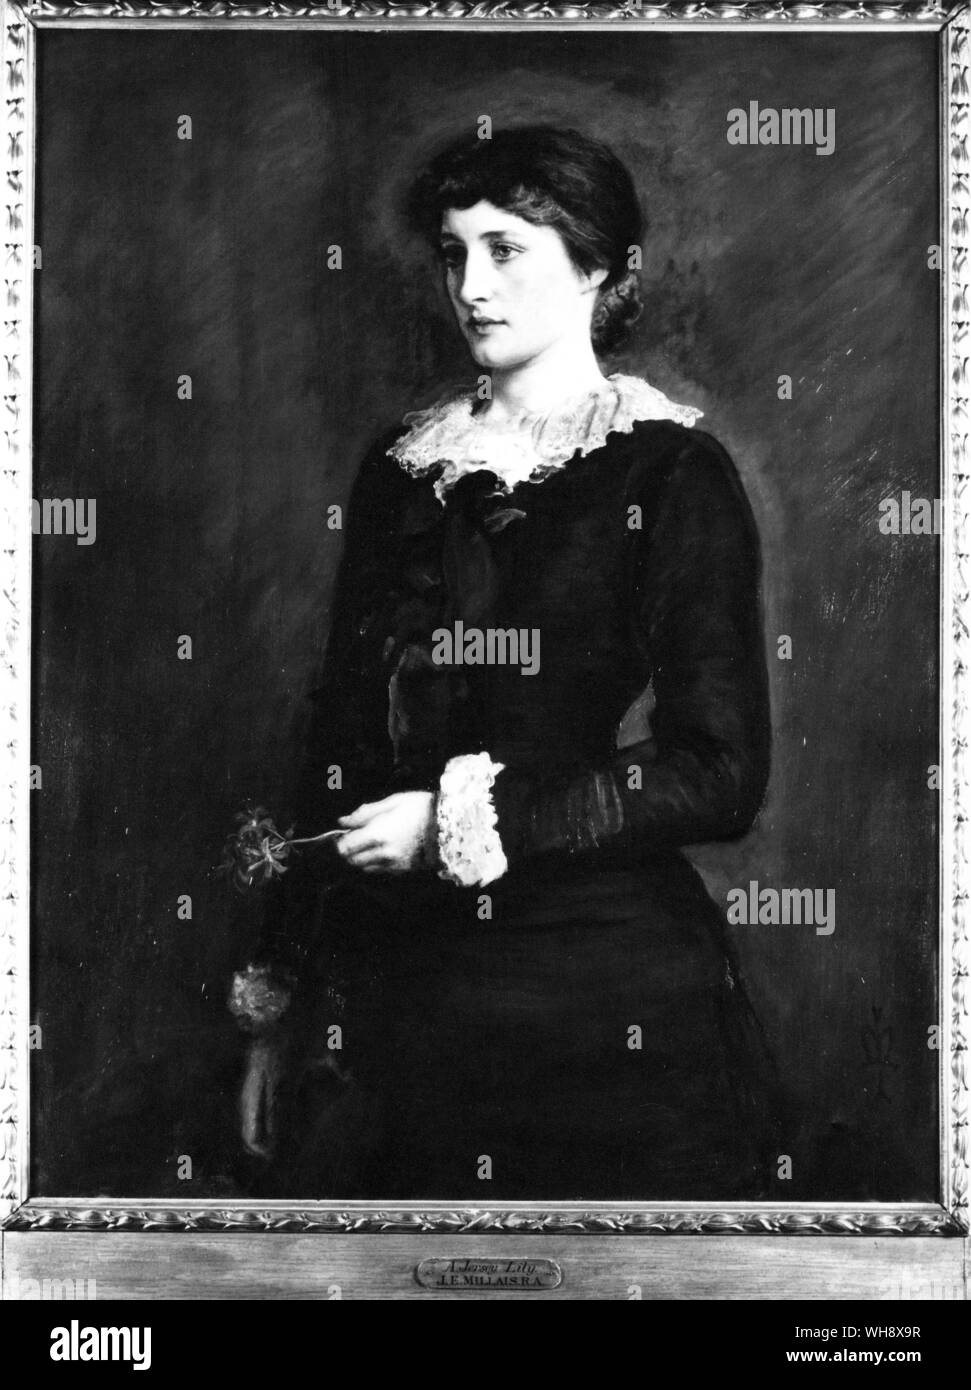 A Jersey Lily (Lillie Langtry) (Emilie Charlotte 1853-1929 English Actress Painting by John Everett Millais 1829-1896.. mistress Edward VII. Stock Photo